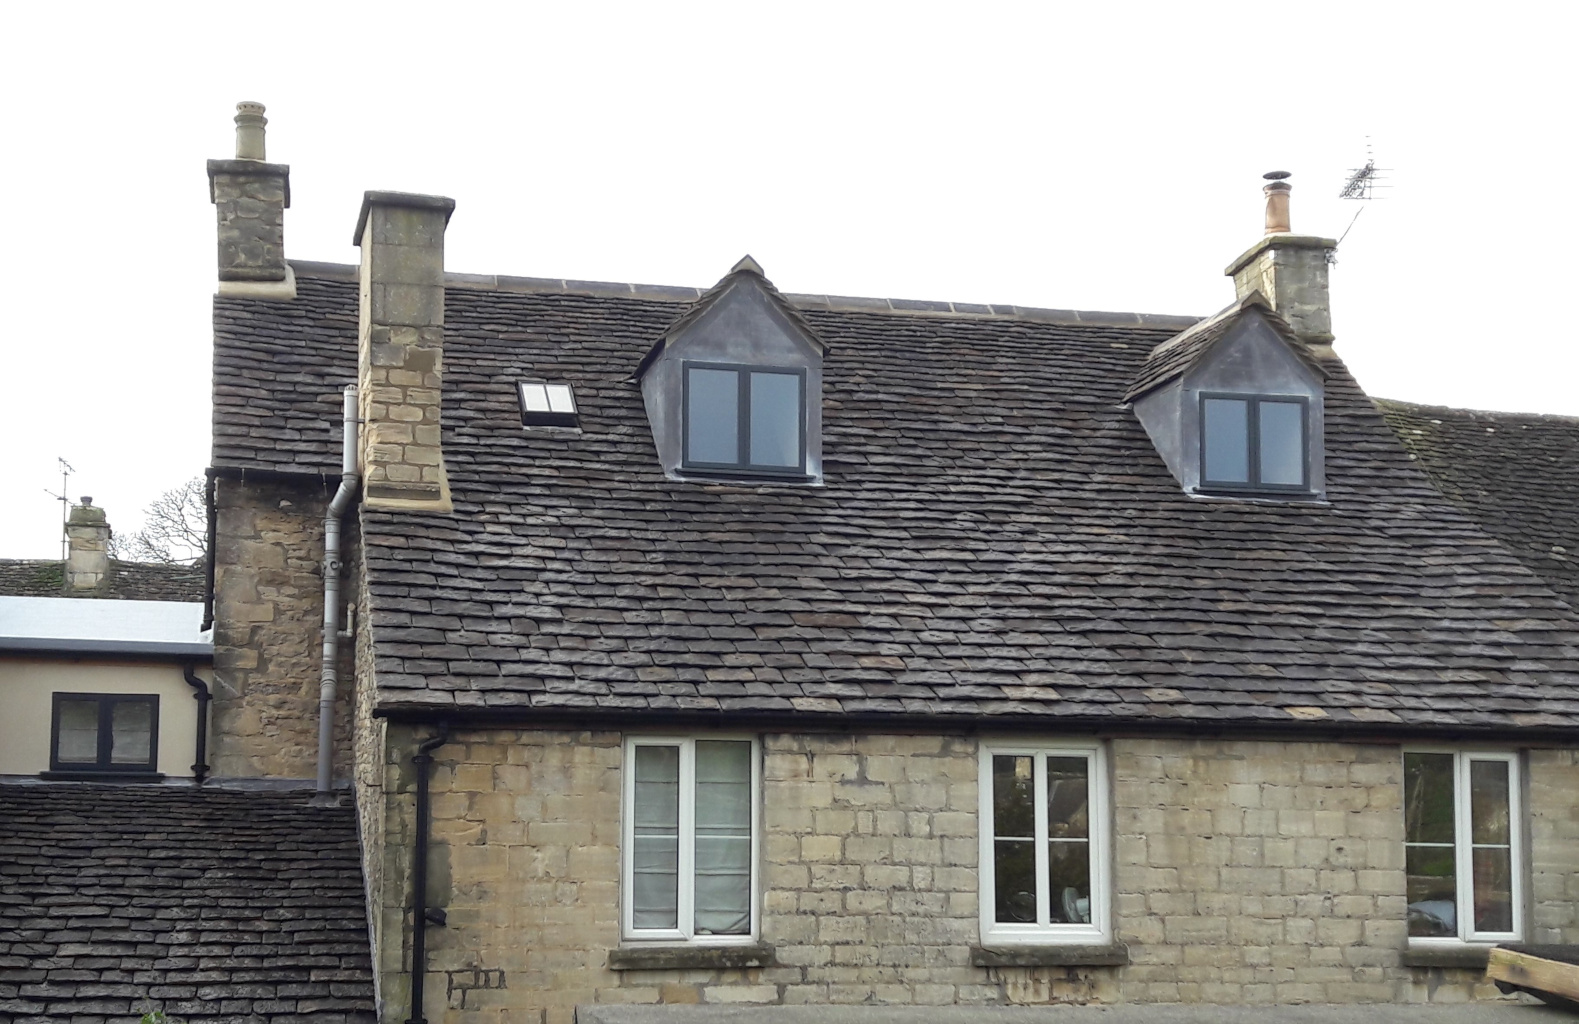 reconstituted stone roof lead dormers